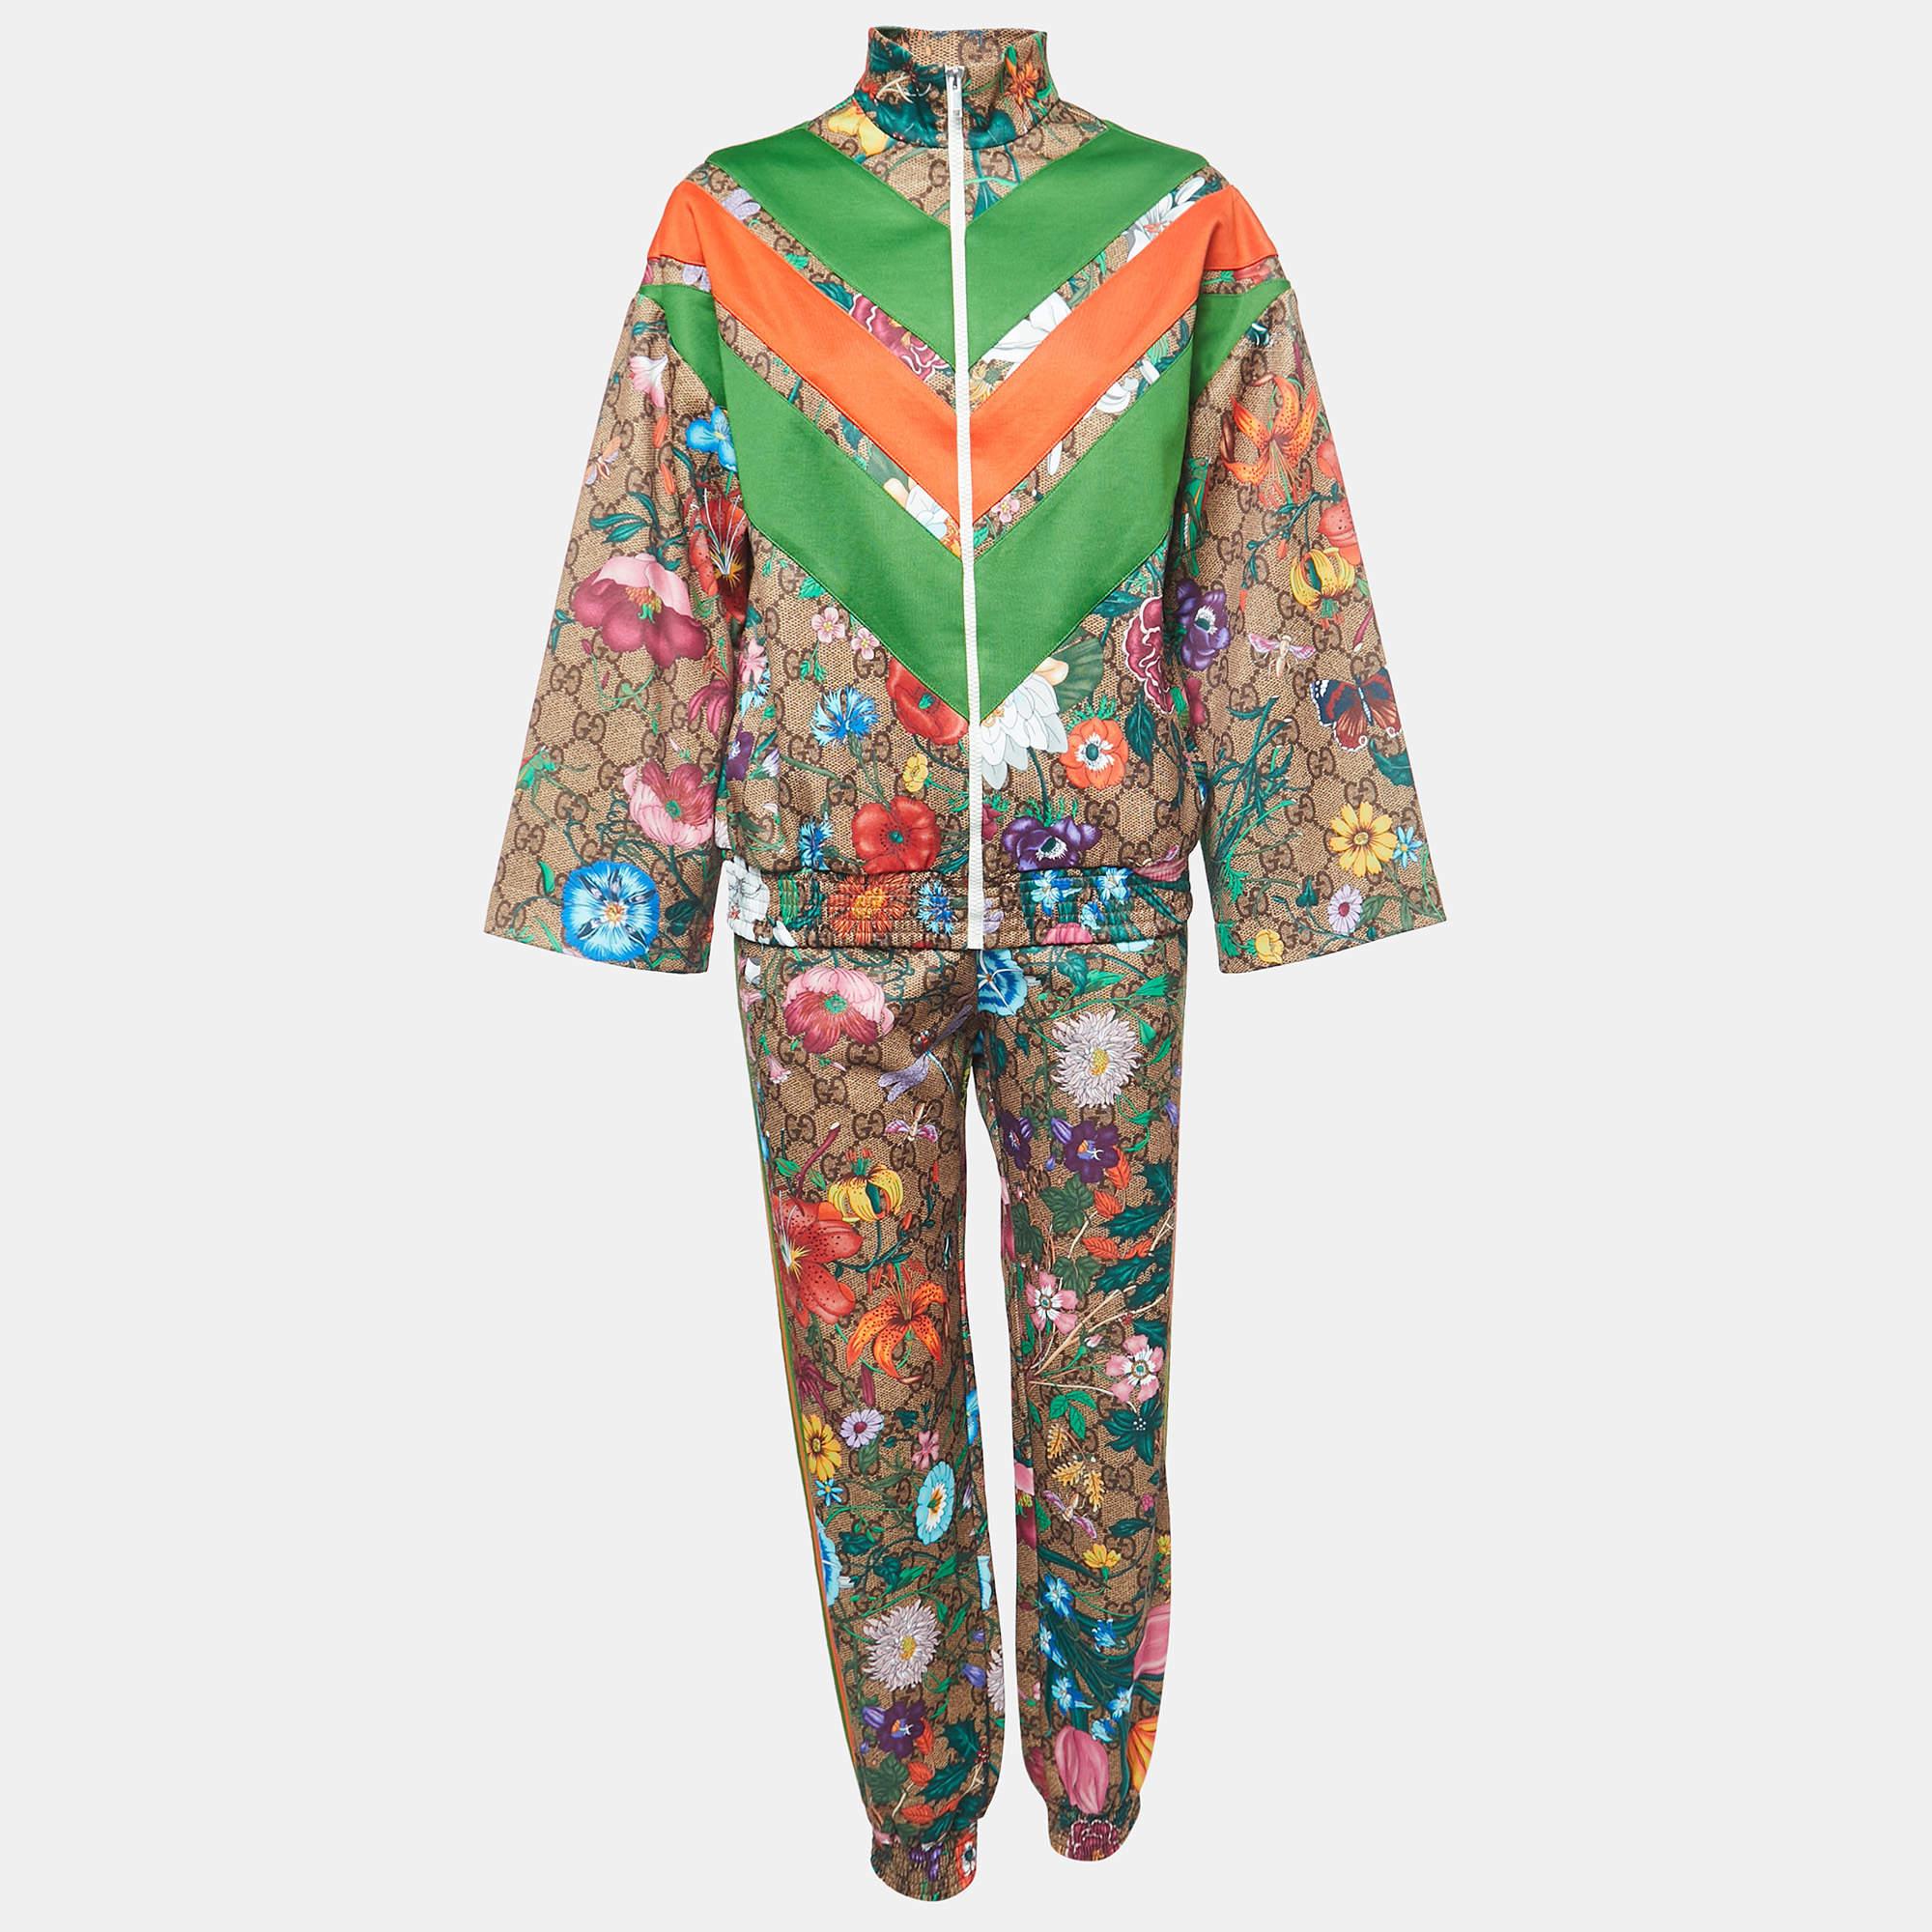 Get that Gucci fit right with this sweatshirt & joggers set. Tailored with care, the set is presented in classic GG print fabric with colorful floral prints for a stunning finish.

